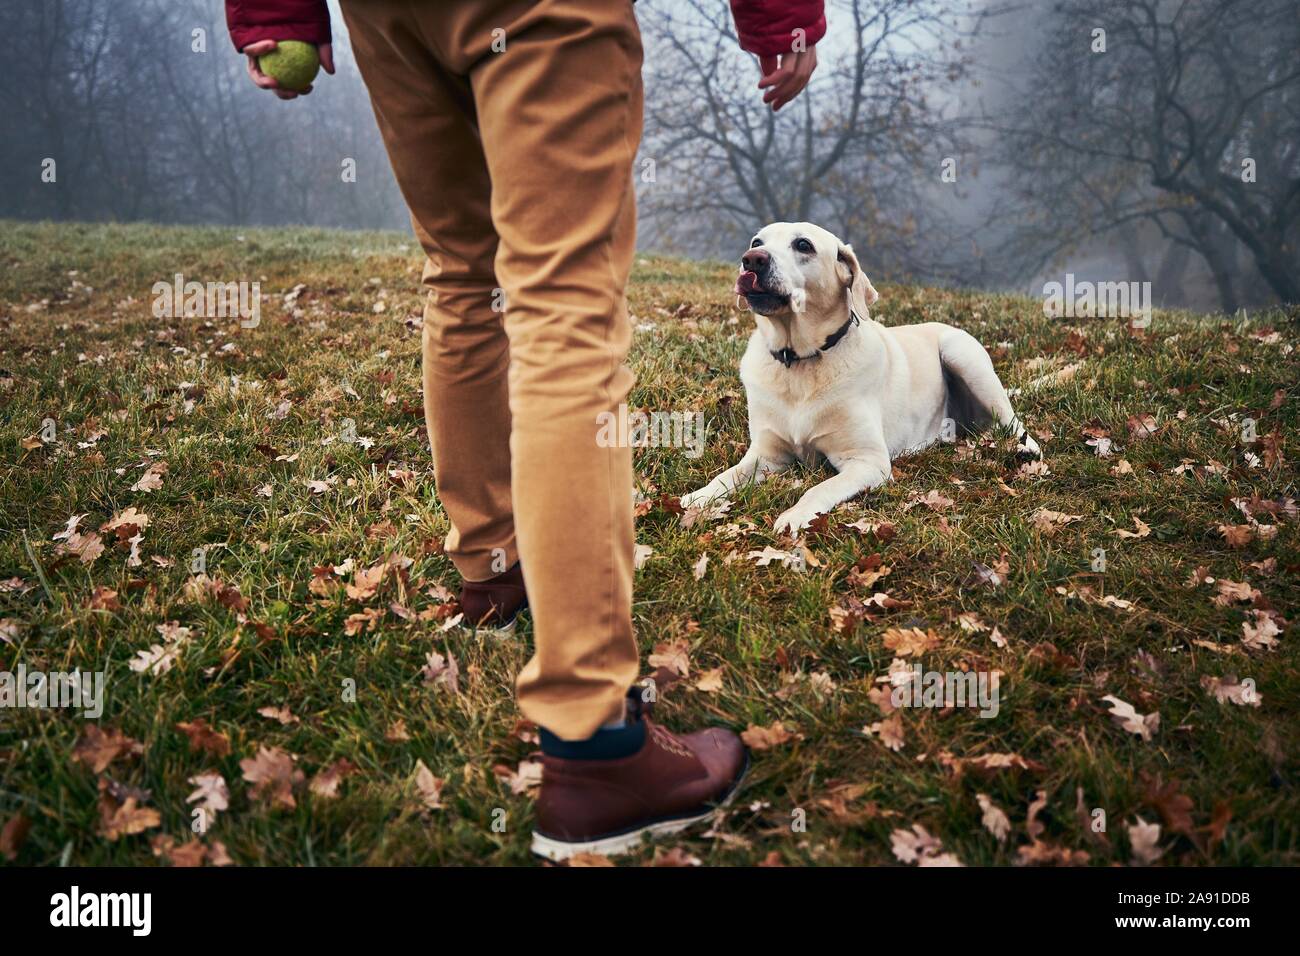 Dog and man on walk in autumn nature. Obedient labrador retriever looking up to his owner. Stock Photo